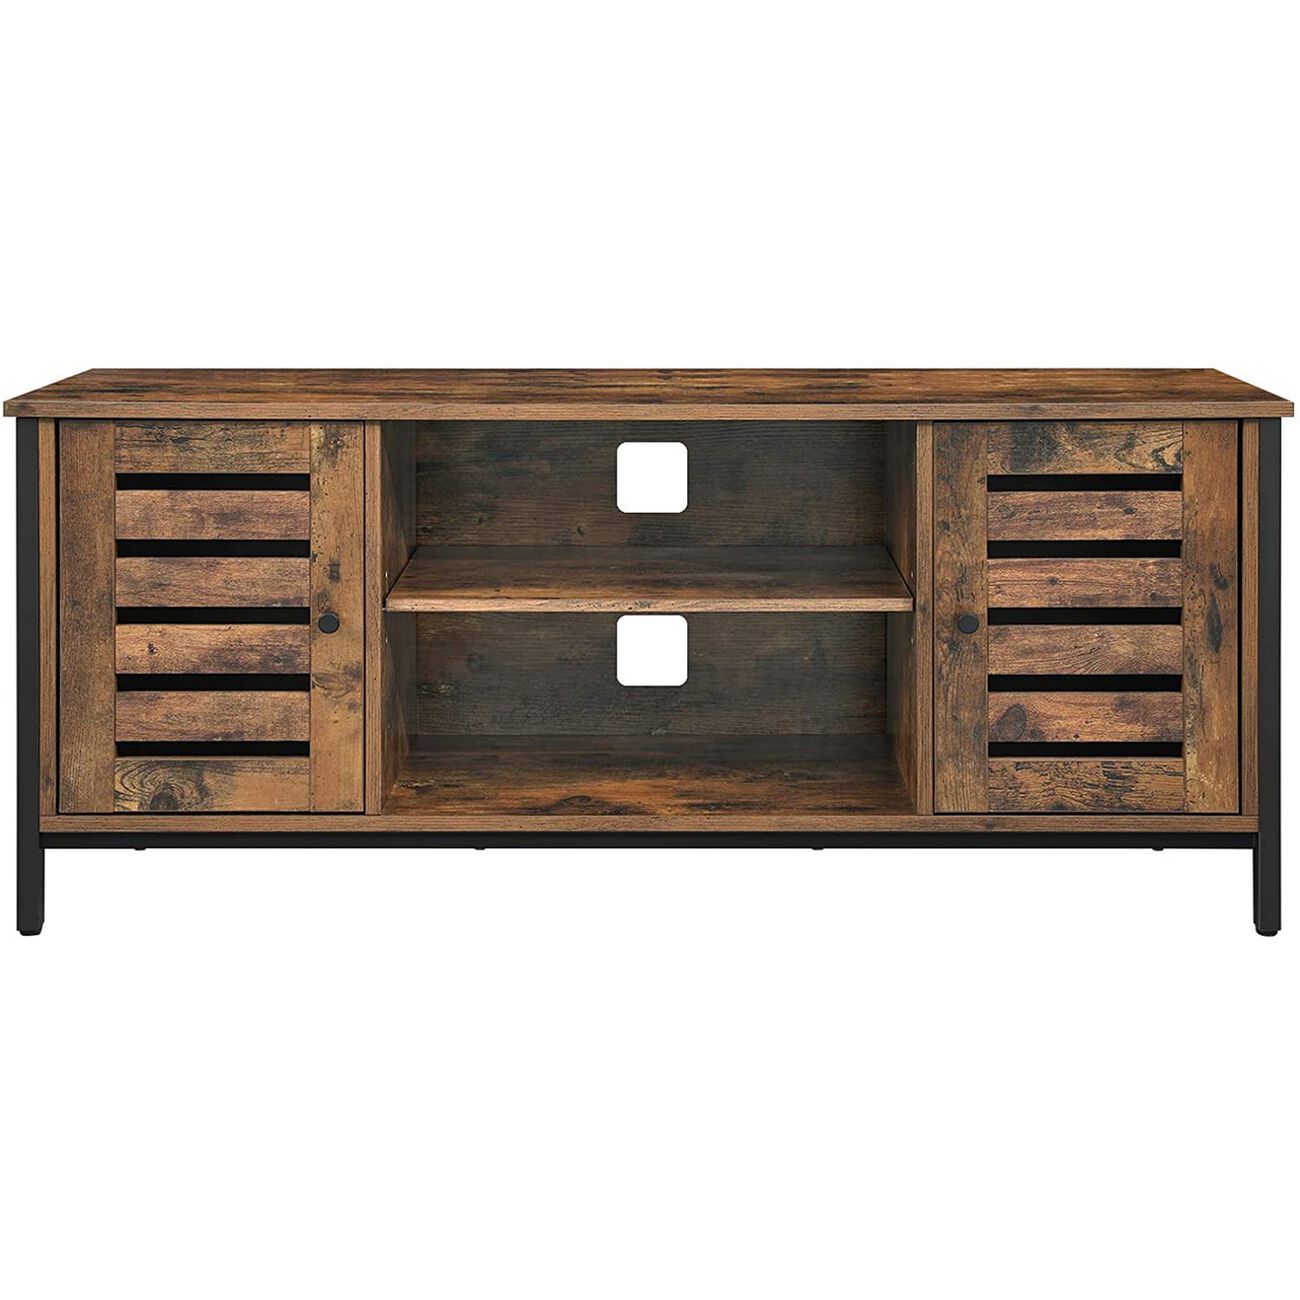 50 Inches Wooden TV Stand with 2 Louvered Doors, Brown and Black